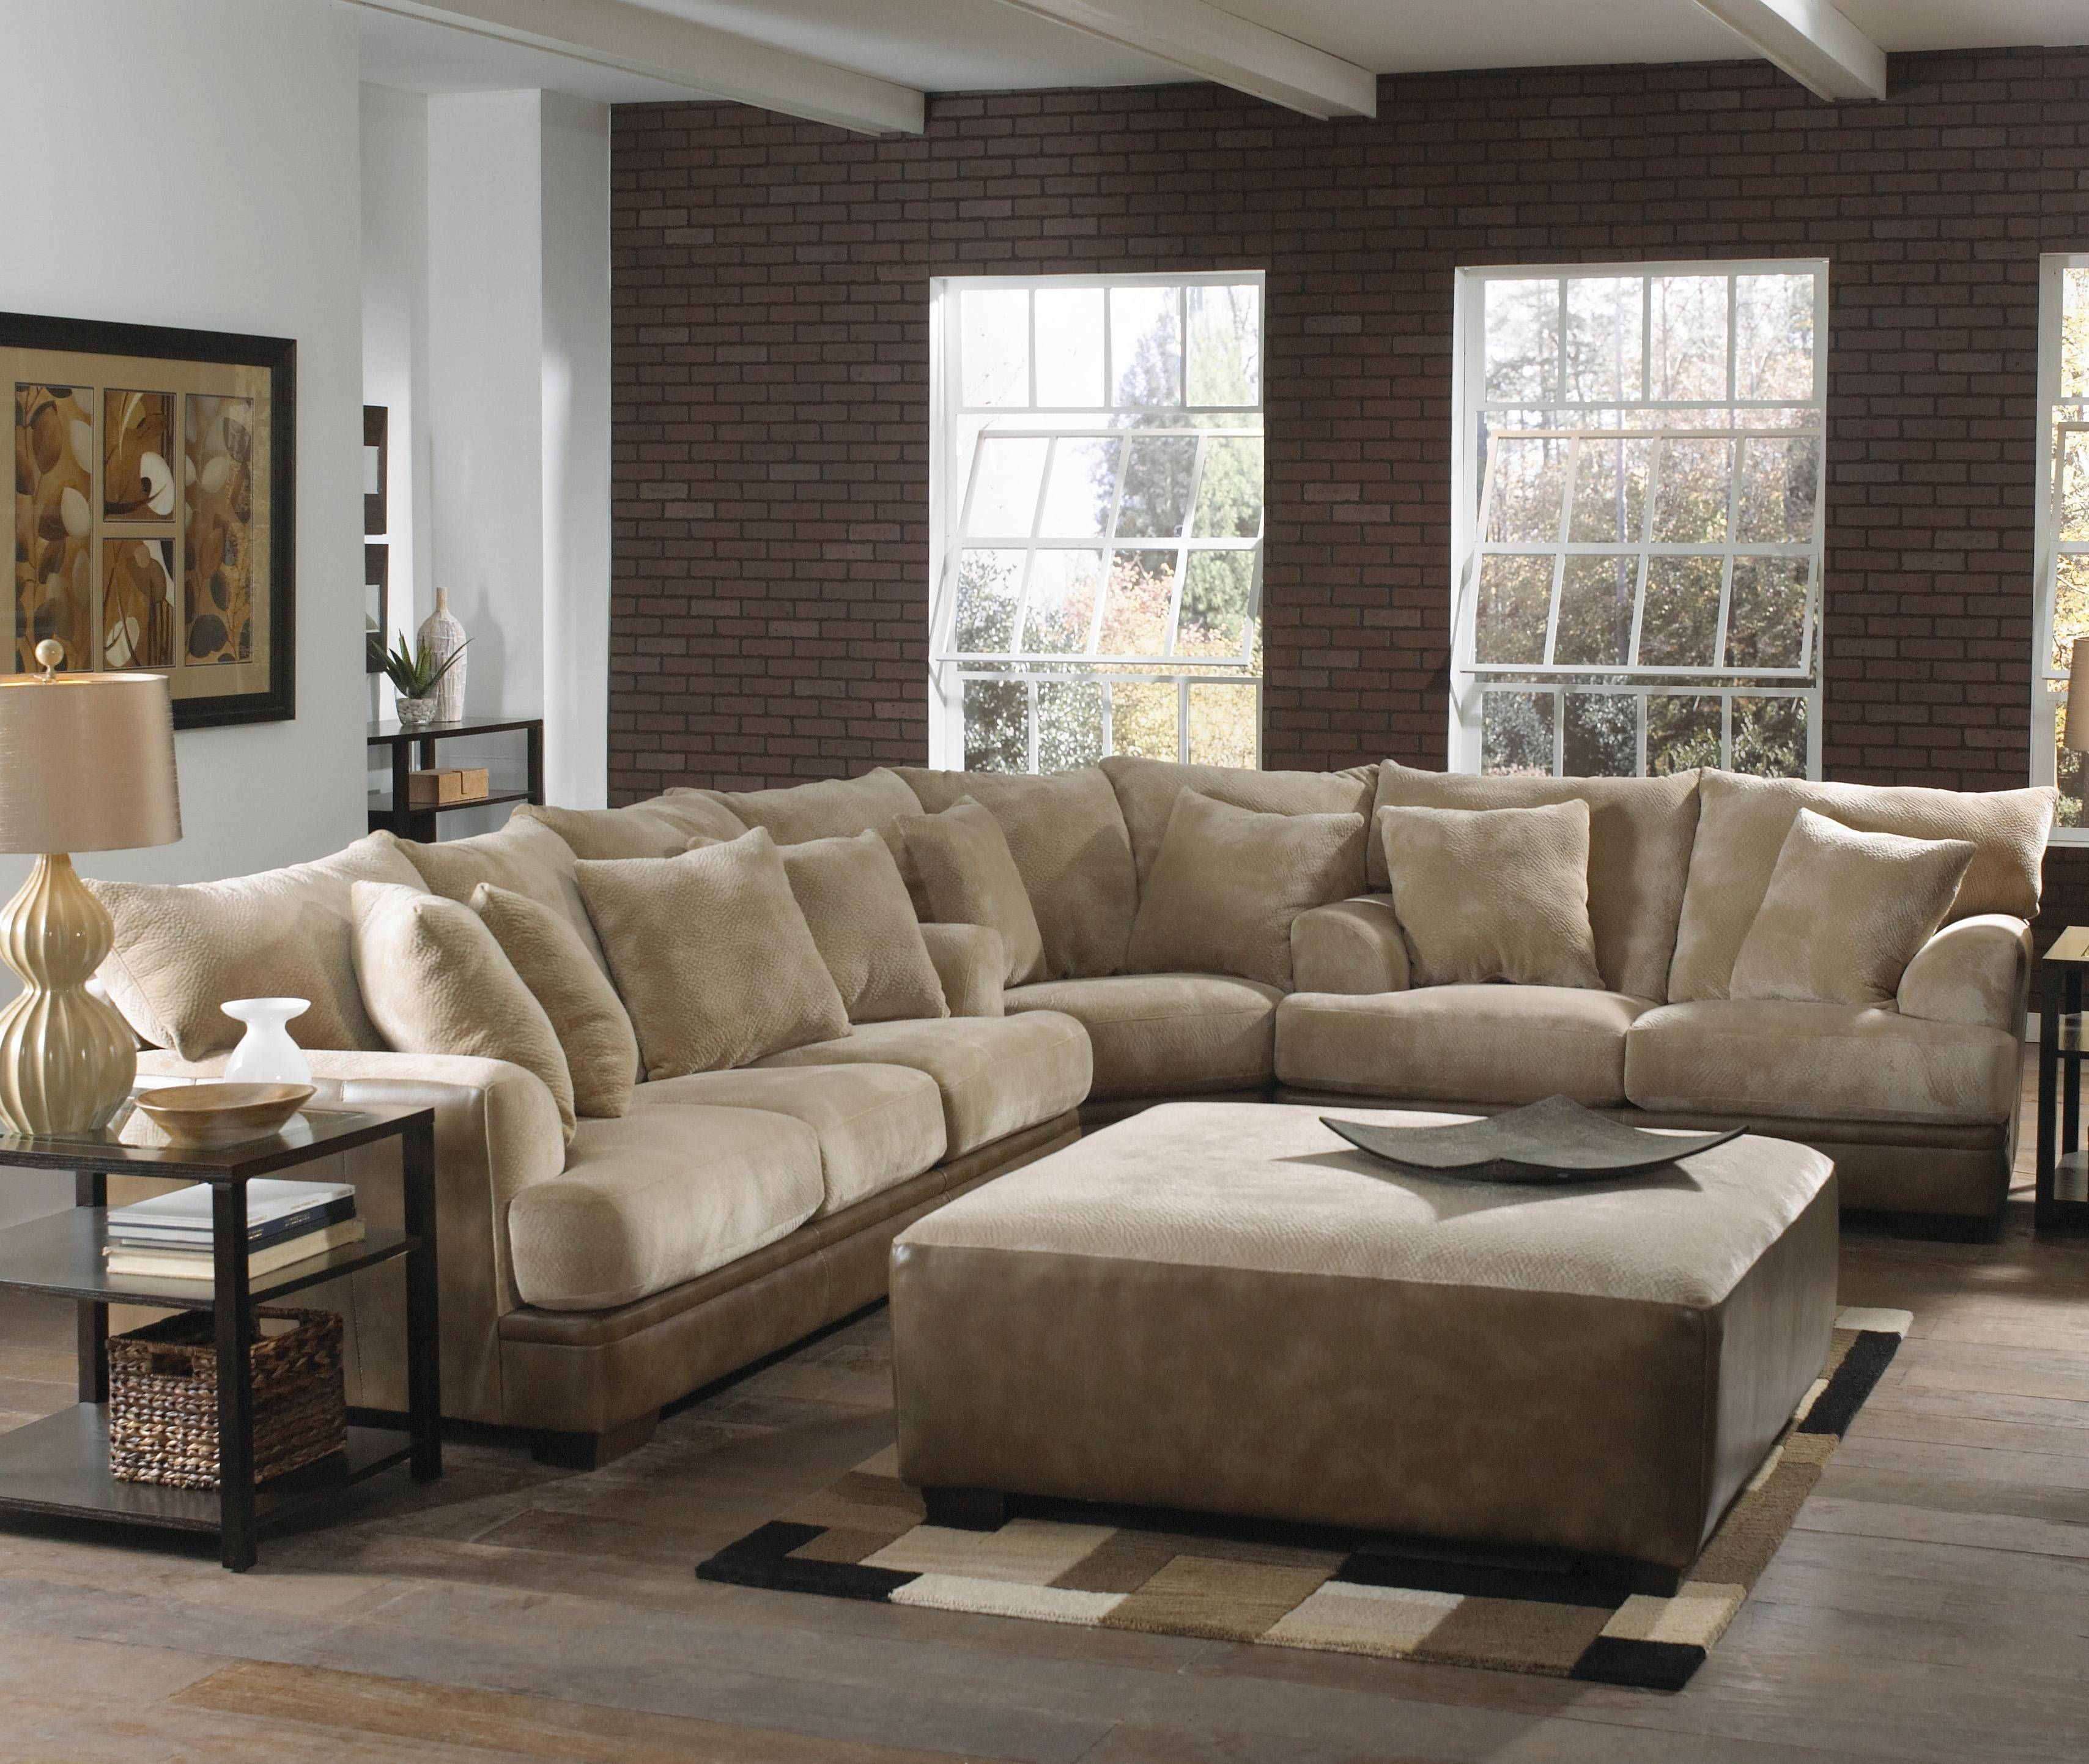 Sofas: Oversized Sofas That Are Ready For Hours Of Lounging Time With Regard To Tufted Sectional Sofa With Chaise (View 14 of 30)